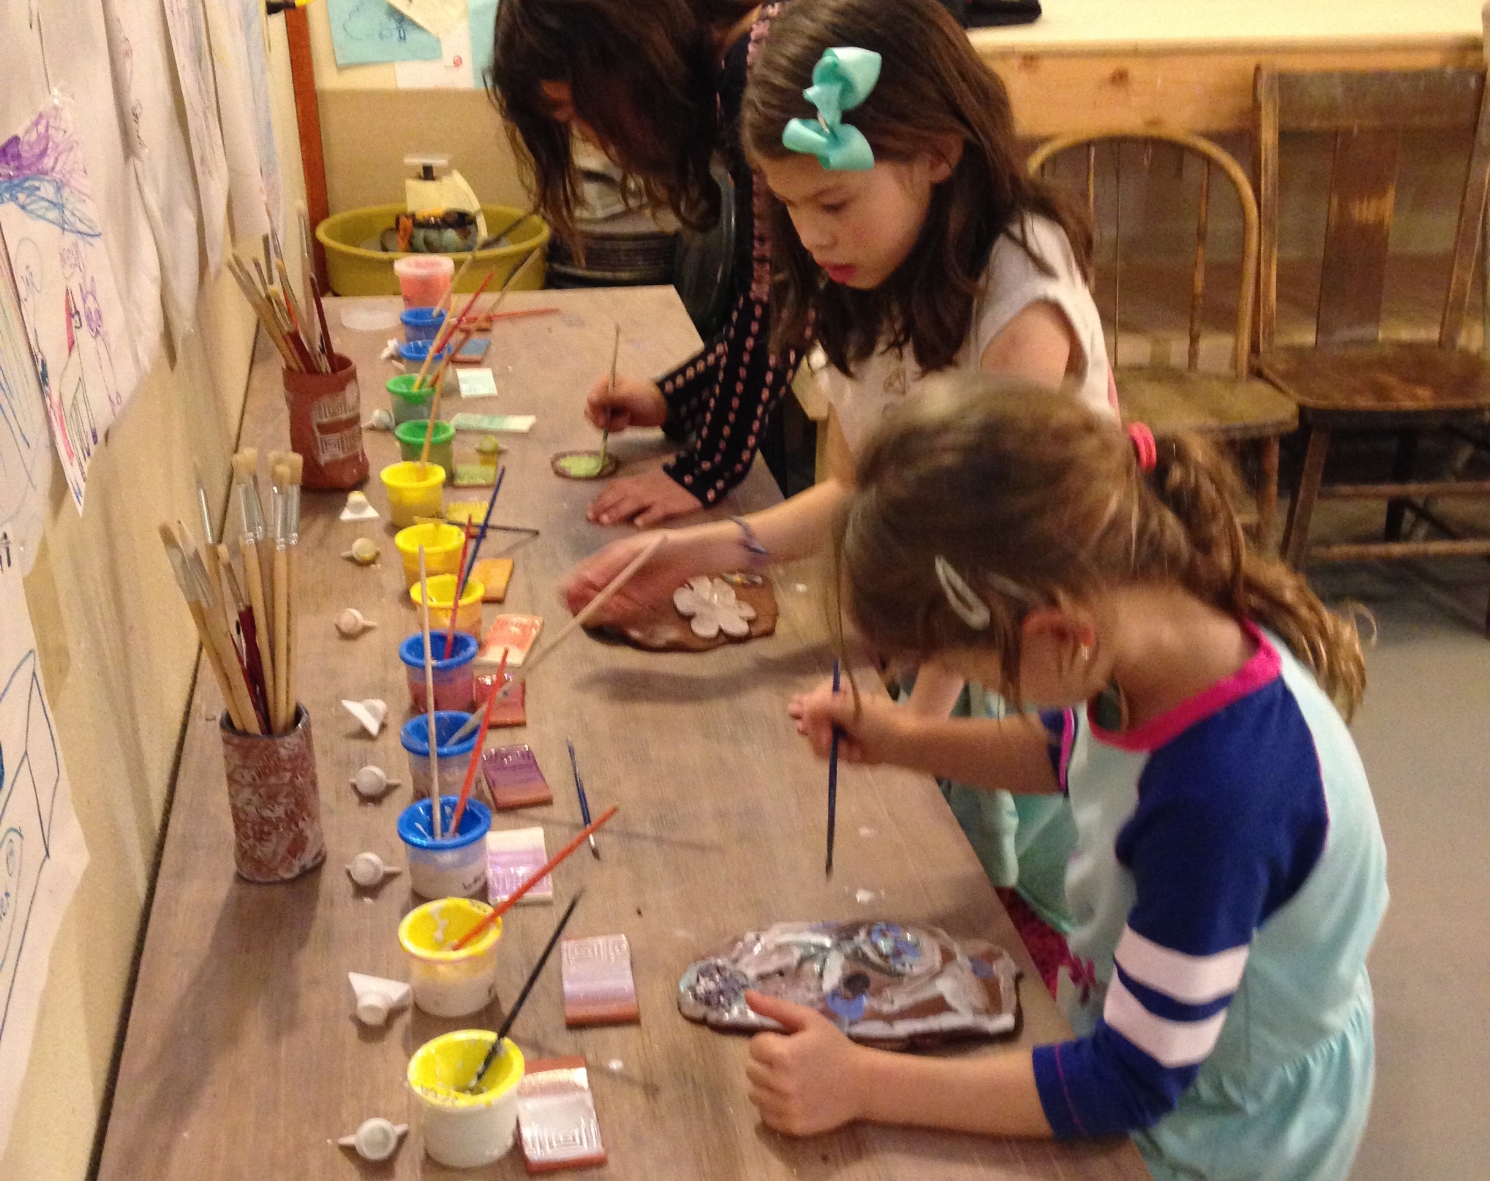 Art Classes for Kids in Portland, OR